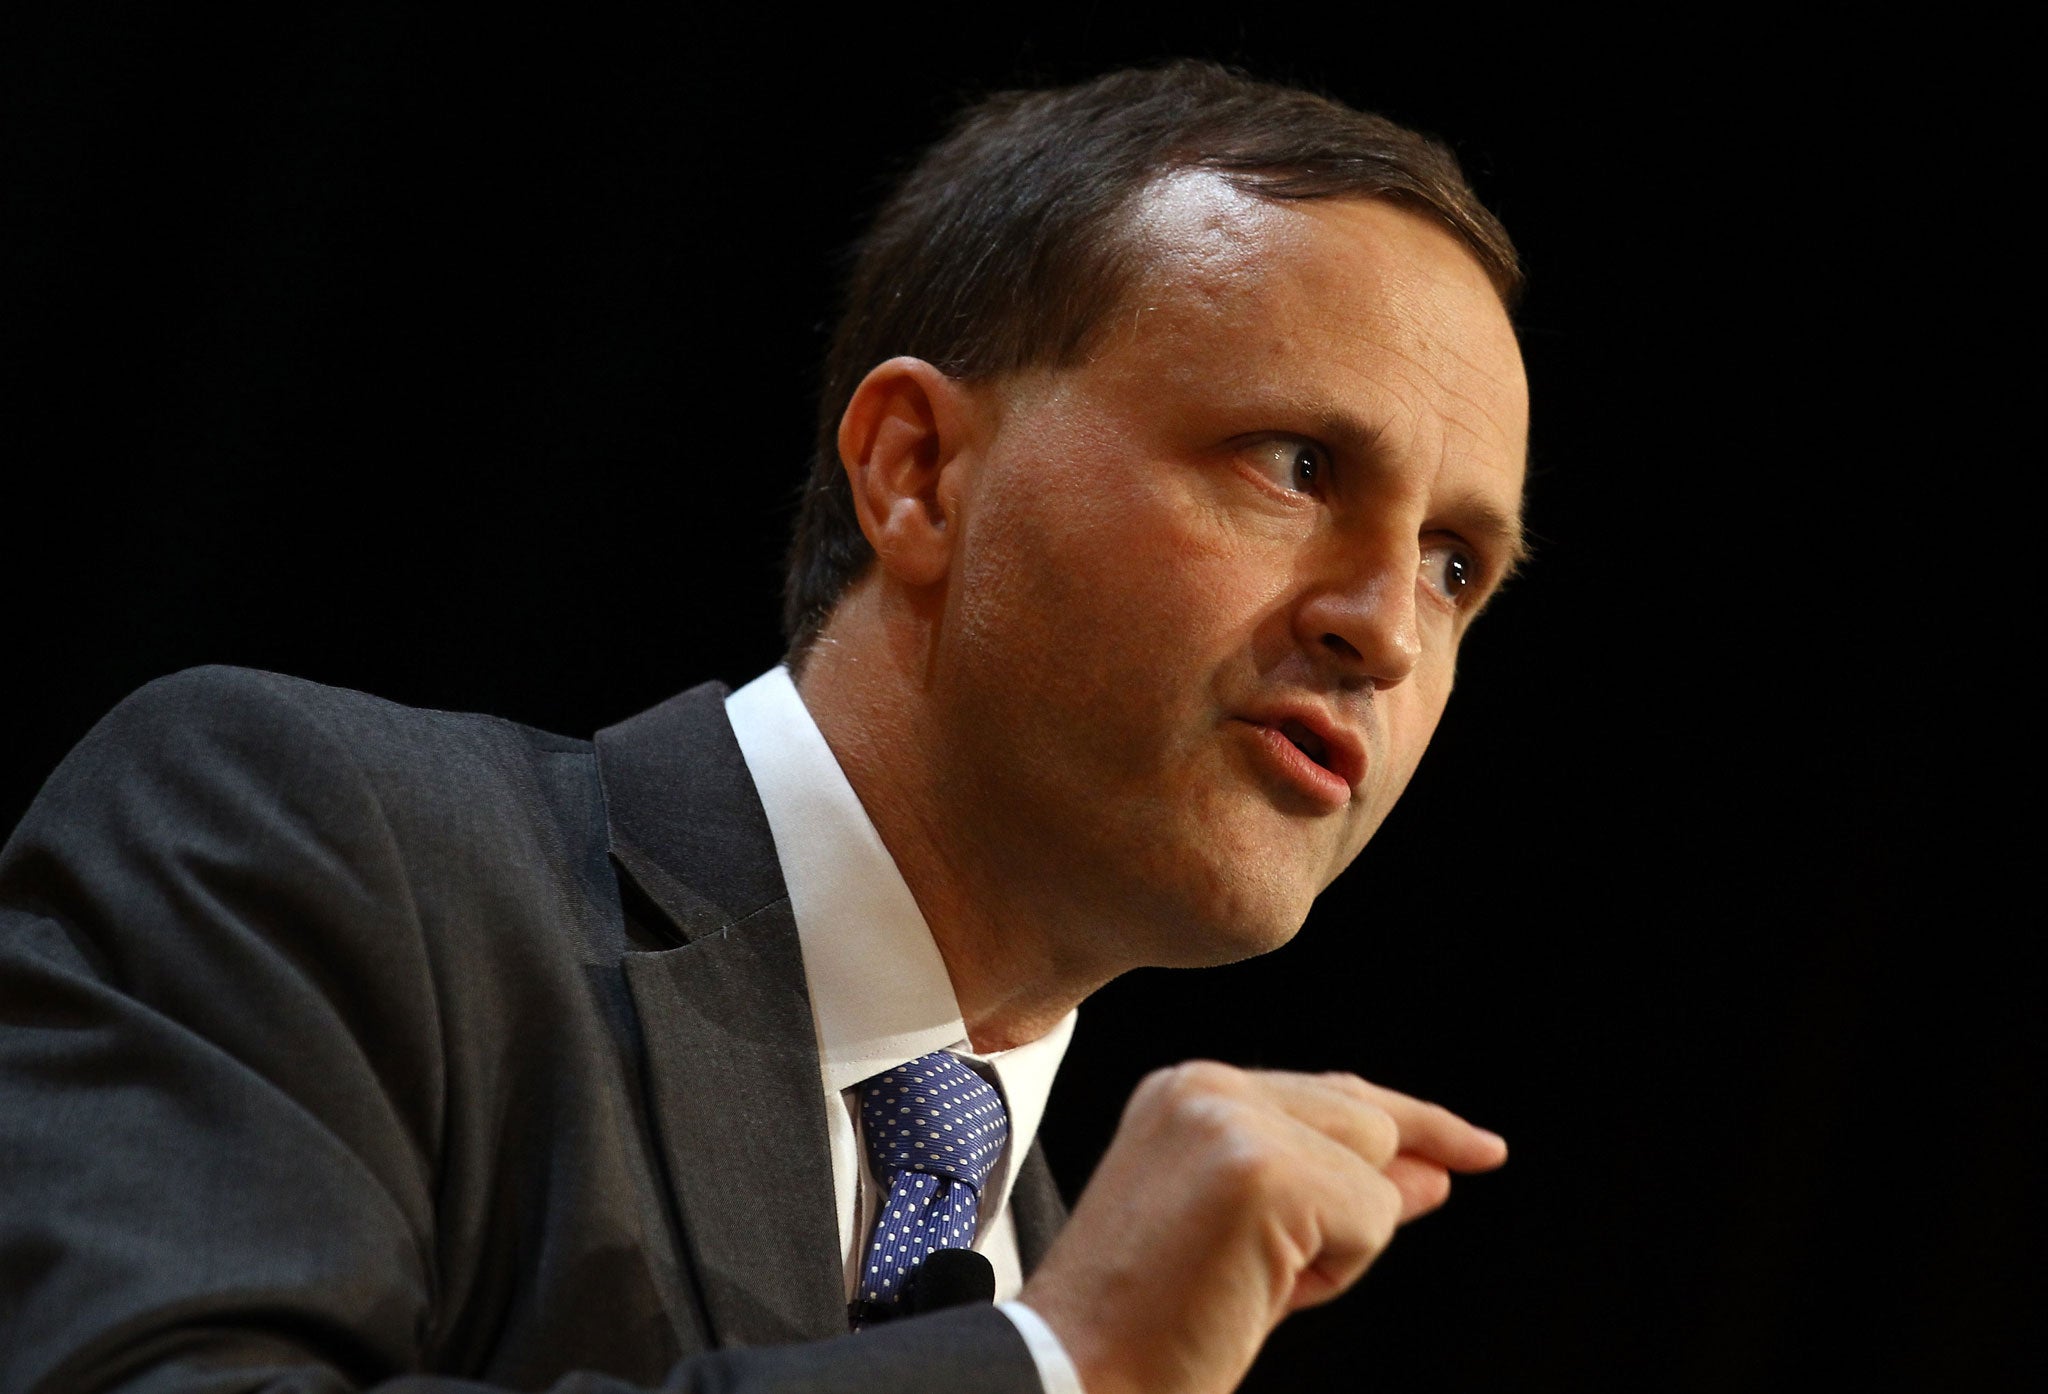 Pensions minister Steve Webb had been keen to introduce a cap from April but it seems he has been persuaded to put back the move until 2015